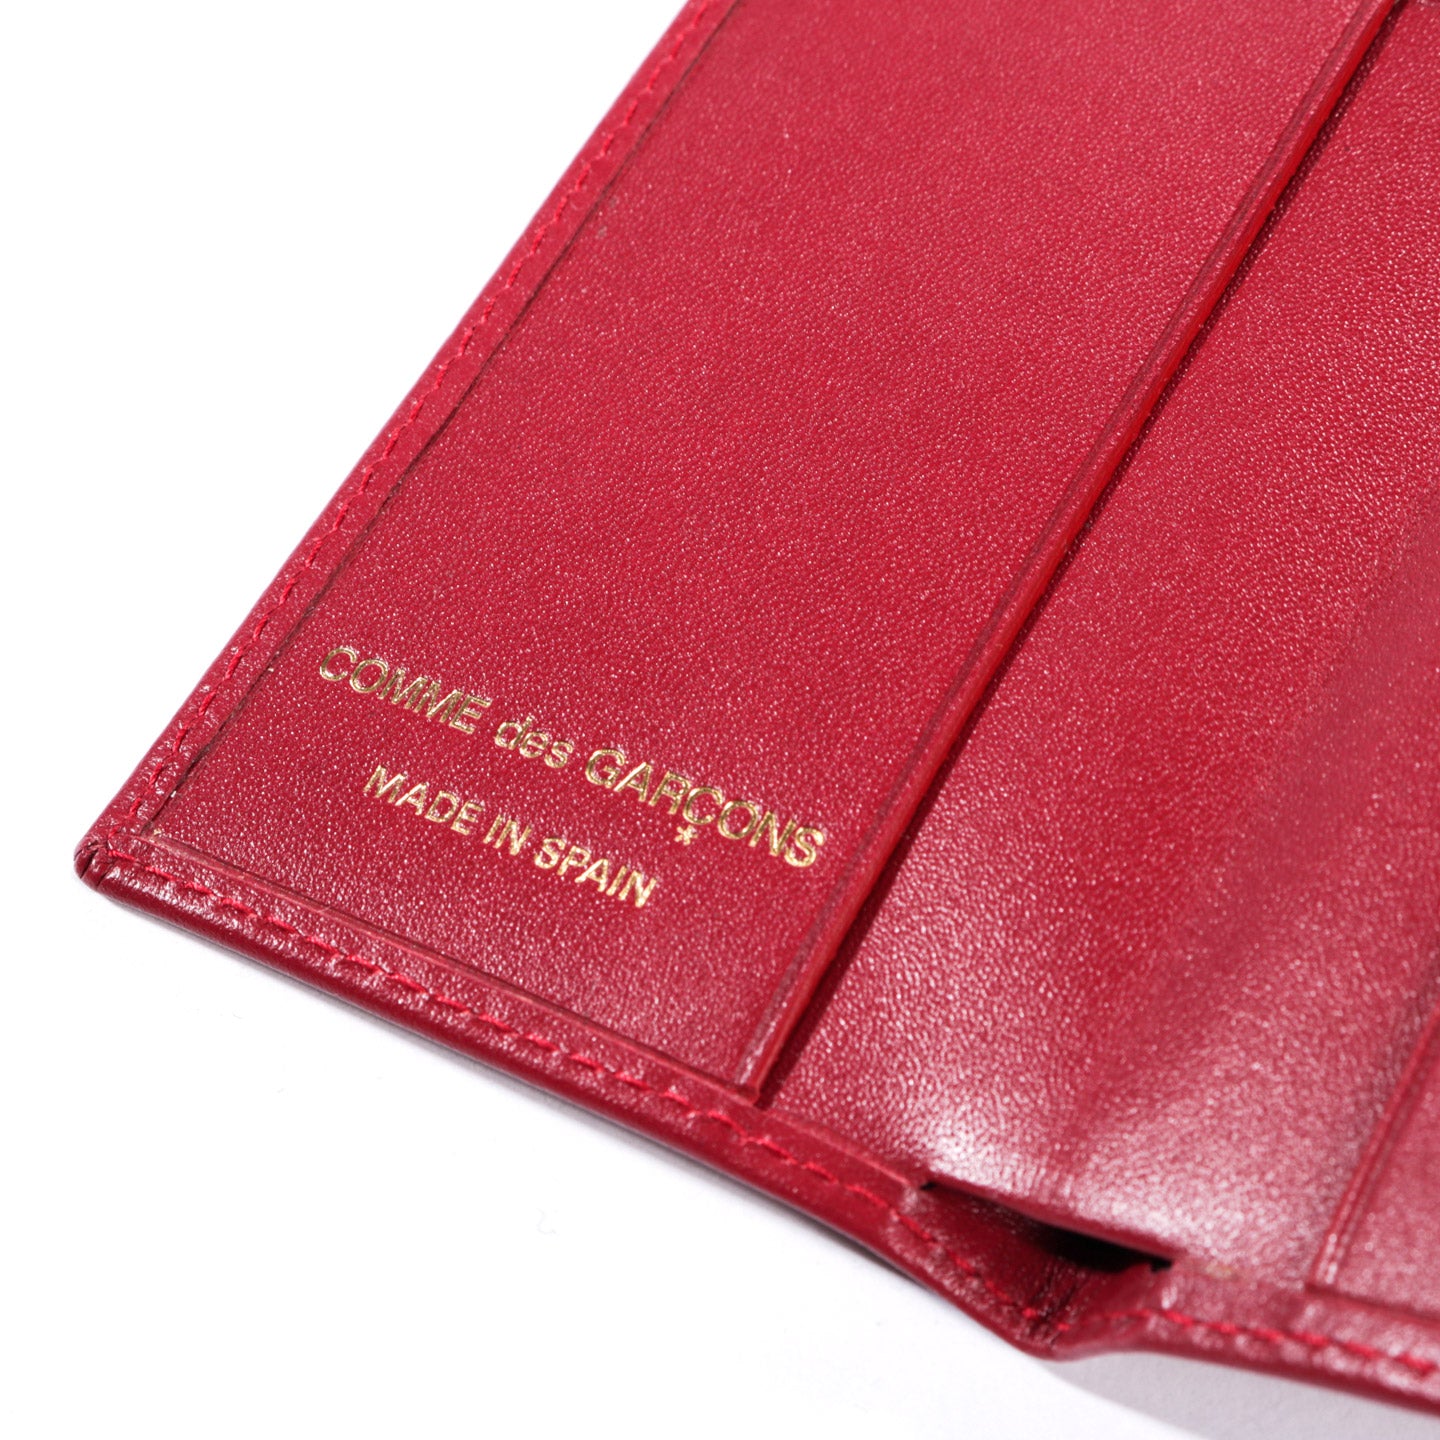 COMME DES GARCONS SA6400 WALLET RED